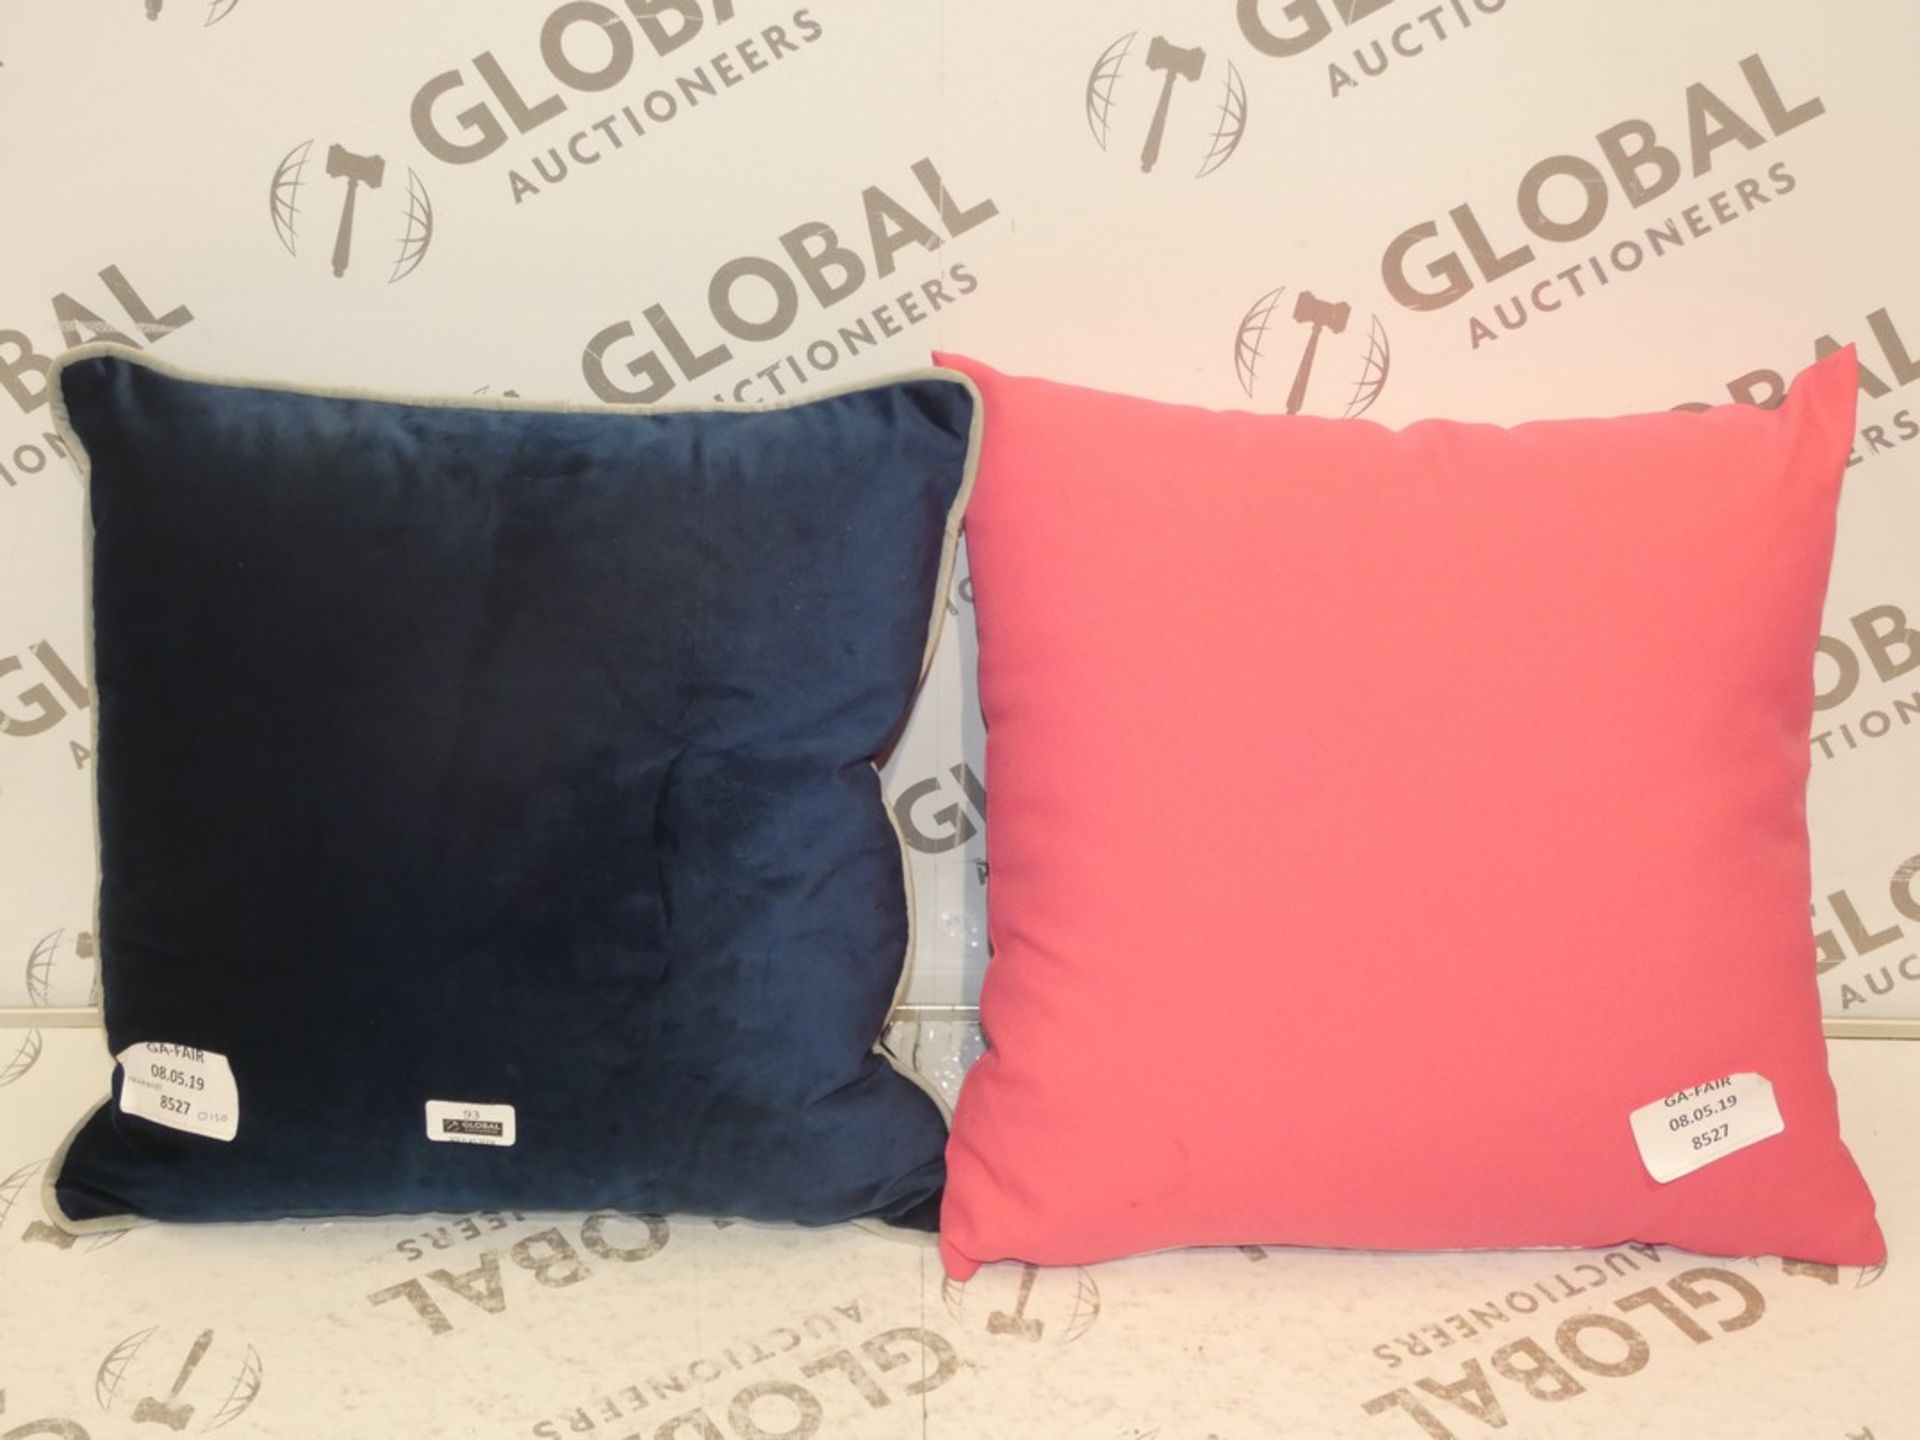 Sourced From Wayfair: Assorted Blue and Pink Designer Scatter Cushions (8527)(HEMA6061) RRP £15